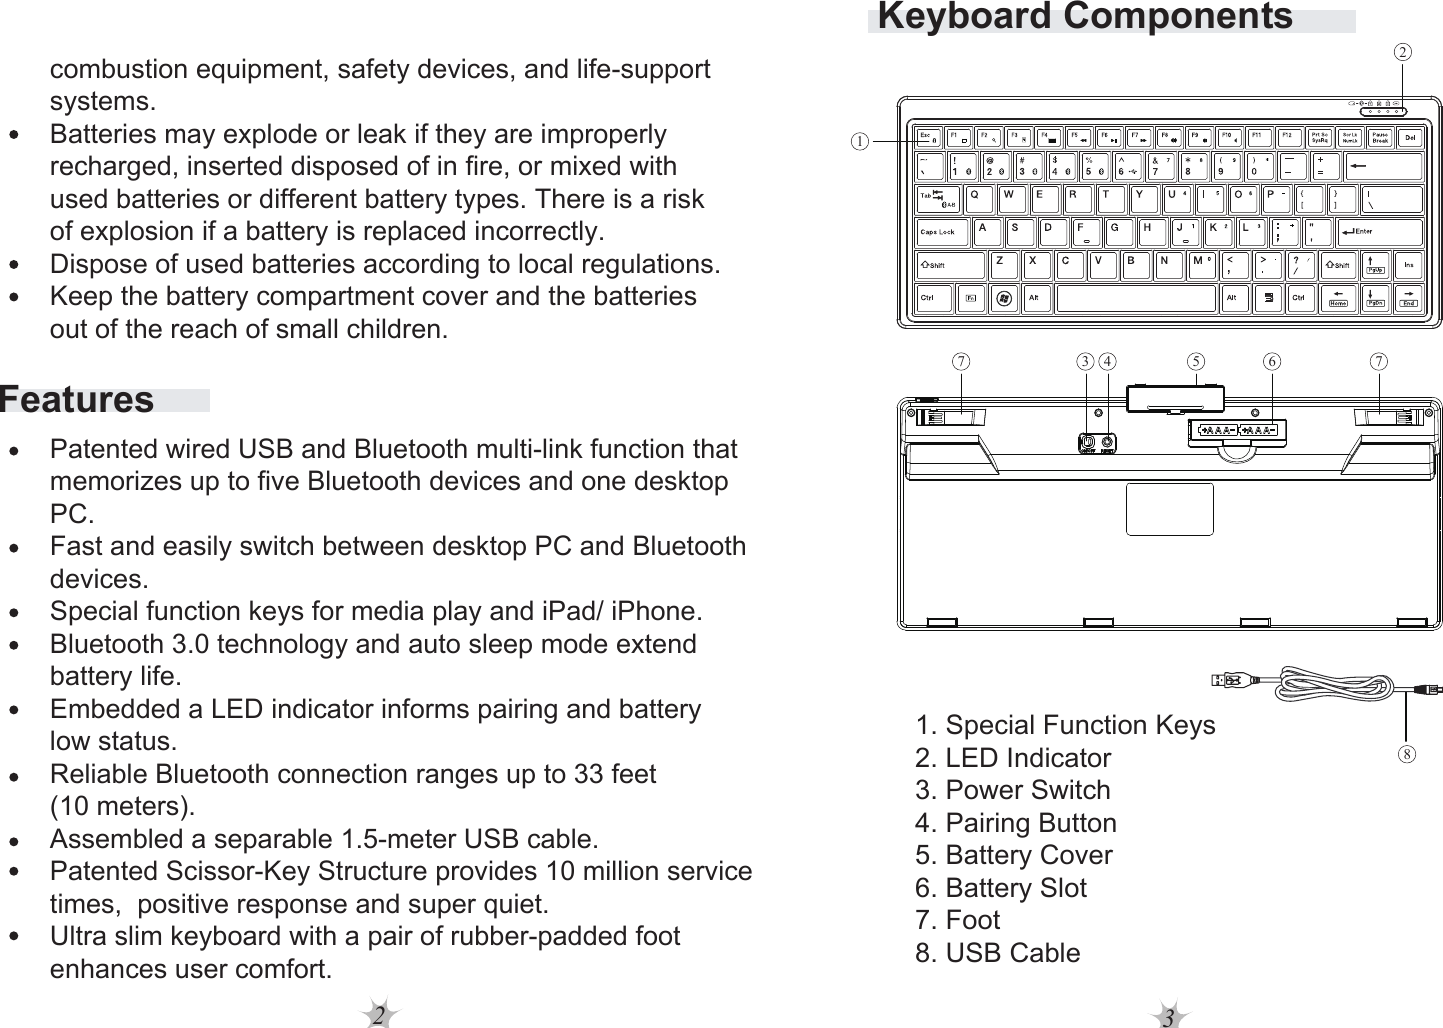 23Keyboard Components1. Special Function Keys2. LED Indicator3. Power Switch4. Pairing Button5. Battery Cover6. Battery Slot7. Foot8. USB Cable217687 543Featurescombustion equipment, safety devices, and life-support systems.Batteries may explode or leak if they are improperly recharged, inserted disposed of in fire, or mixed with used batteries or different battery types. There is a risk of explosion if a battery is replaced incorrectly.Dispose of used batteries according to local regulations.Keep the battery compartment cover and the batteries out of the reach of small children. Patented wired USB and Bluetooth multi-link function that memorizes up to five Bluetooth devices and one desktop PC.Fast and easily switch between desktop PC and Bluetooth devices.Special function keys for media play and iPad/ iPhone.Bluetooth 3.0 technology and auto sleep mode extend battery life.Embedded a LED indicator informs pairing and battery low status.Reliable Bluetooth connection ranges up to 33 feet (10 meters).Assembled a separable 1.5-meter USB cable.Patented Scissor-Key Structure provides 10 million service times,  positive response and super quiet.Ultra slim keyboard with a pair of rubber-padded foot enhances user comfort.